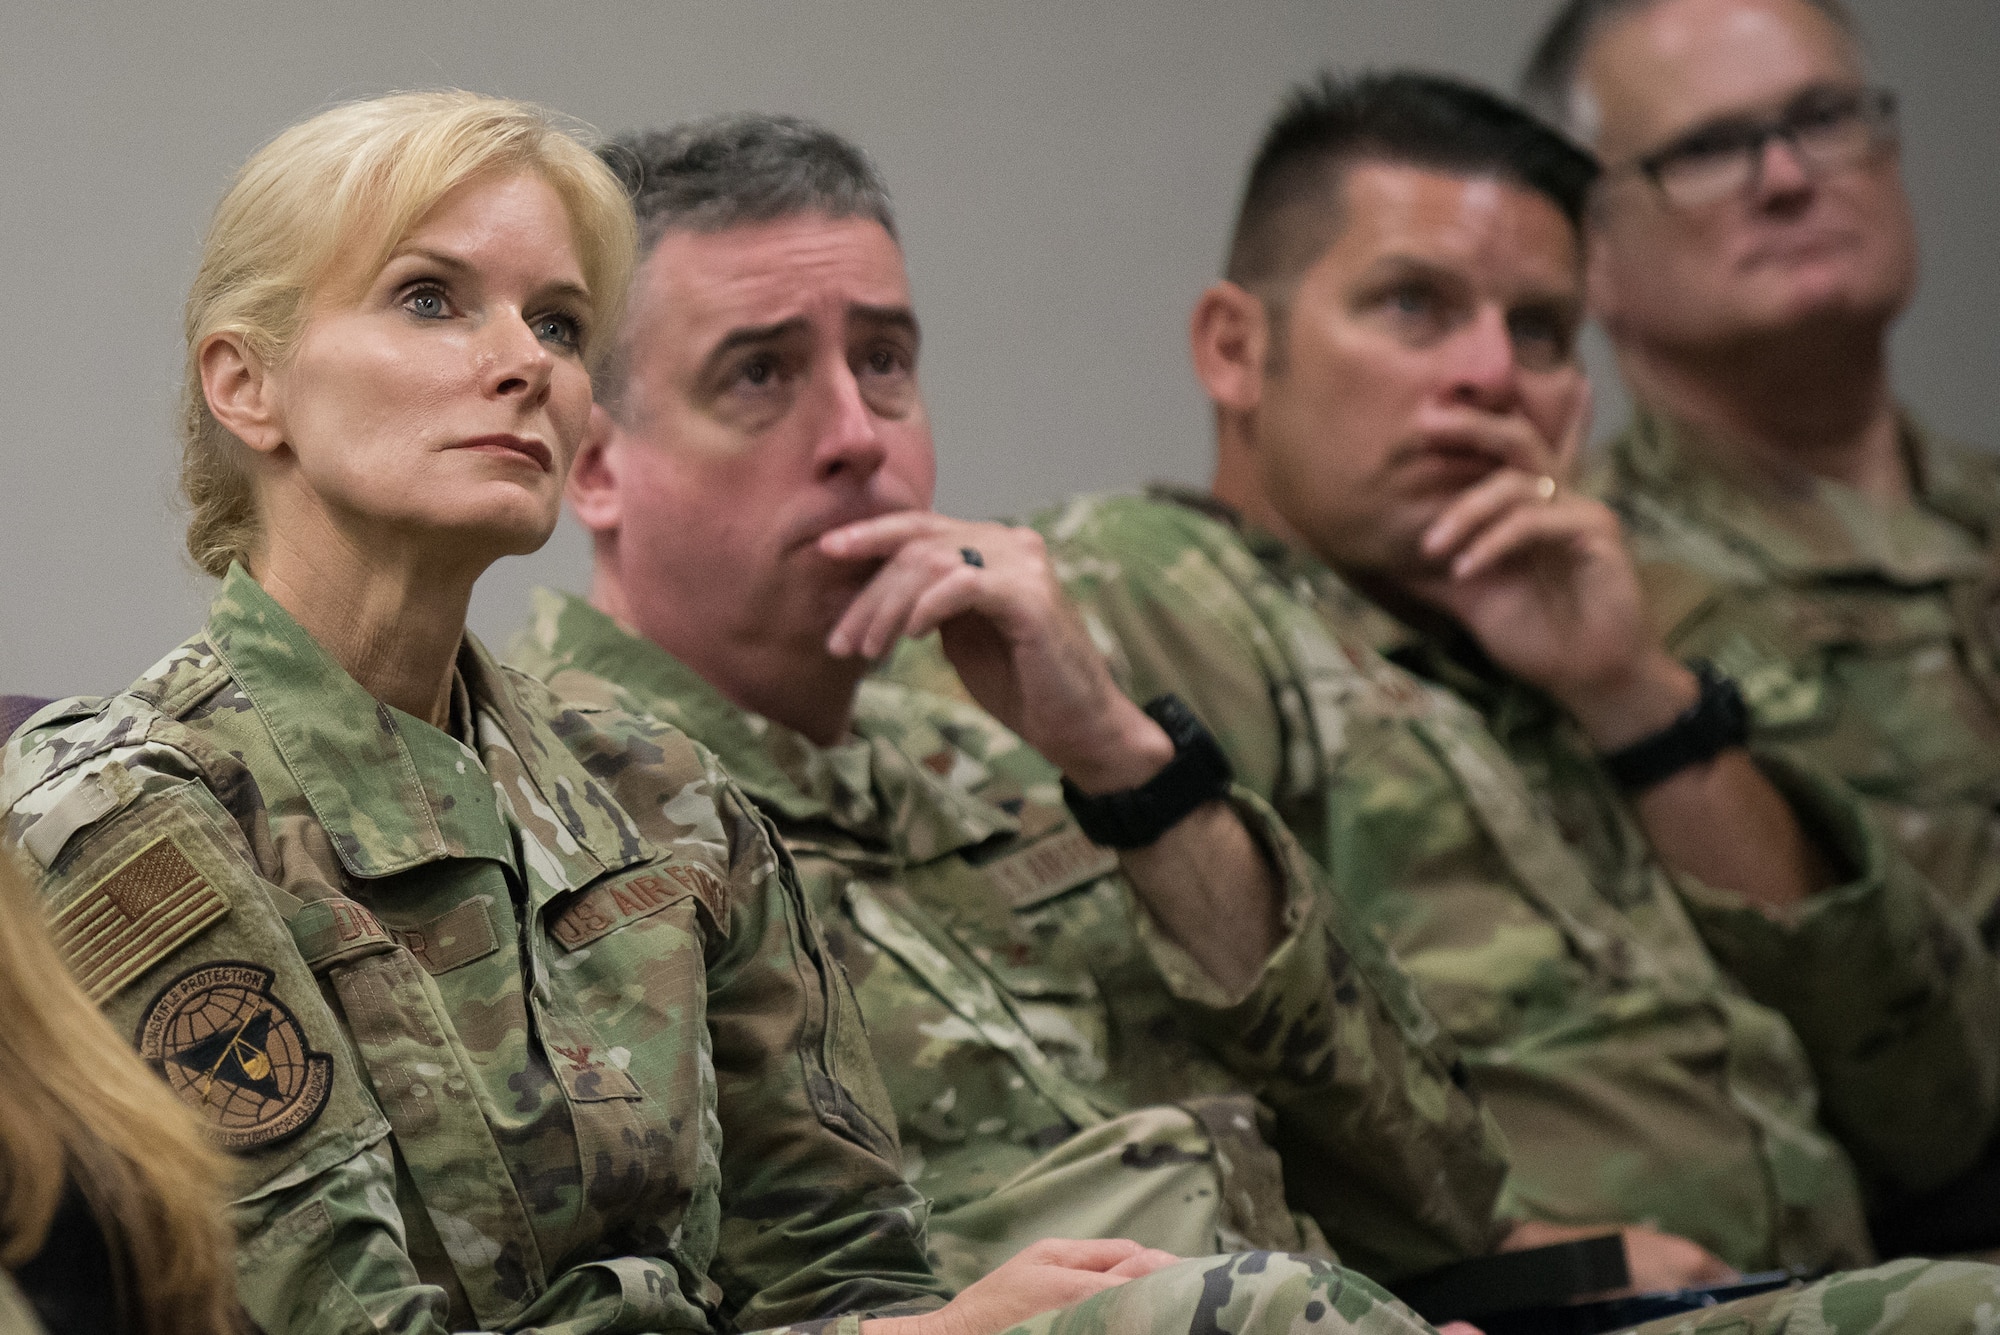 Members of the 123rd Airlift Wing listen to Lt. Gen. L. Scott Rice, director of the Air National Guard, during a town hall meeting at the Kentucky Air National Guard Base in Louisville, Ky. Aug. 10, 2019. Rice took questions from the audience and discussed a variety of topics, including C-130 aircraft modernization, expansion of the Active Guard and Reserve program, and potential drawdowns in the medical service corps. (U.S. Air National Guard photo by Dale Greer)